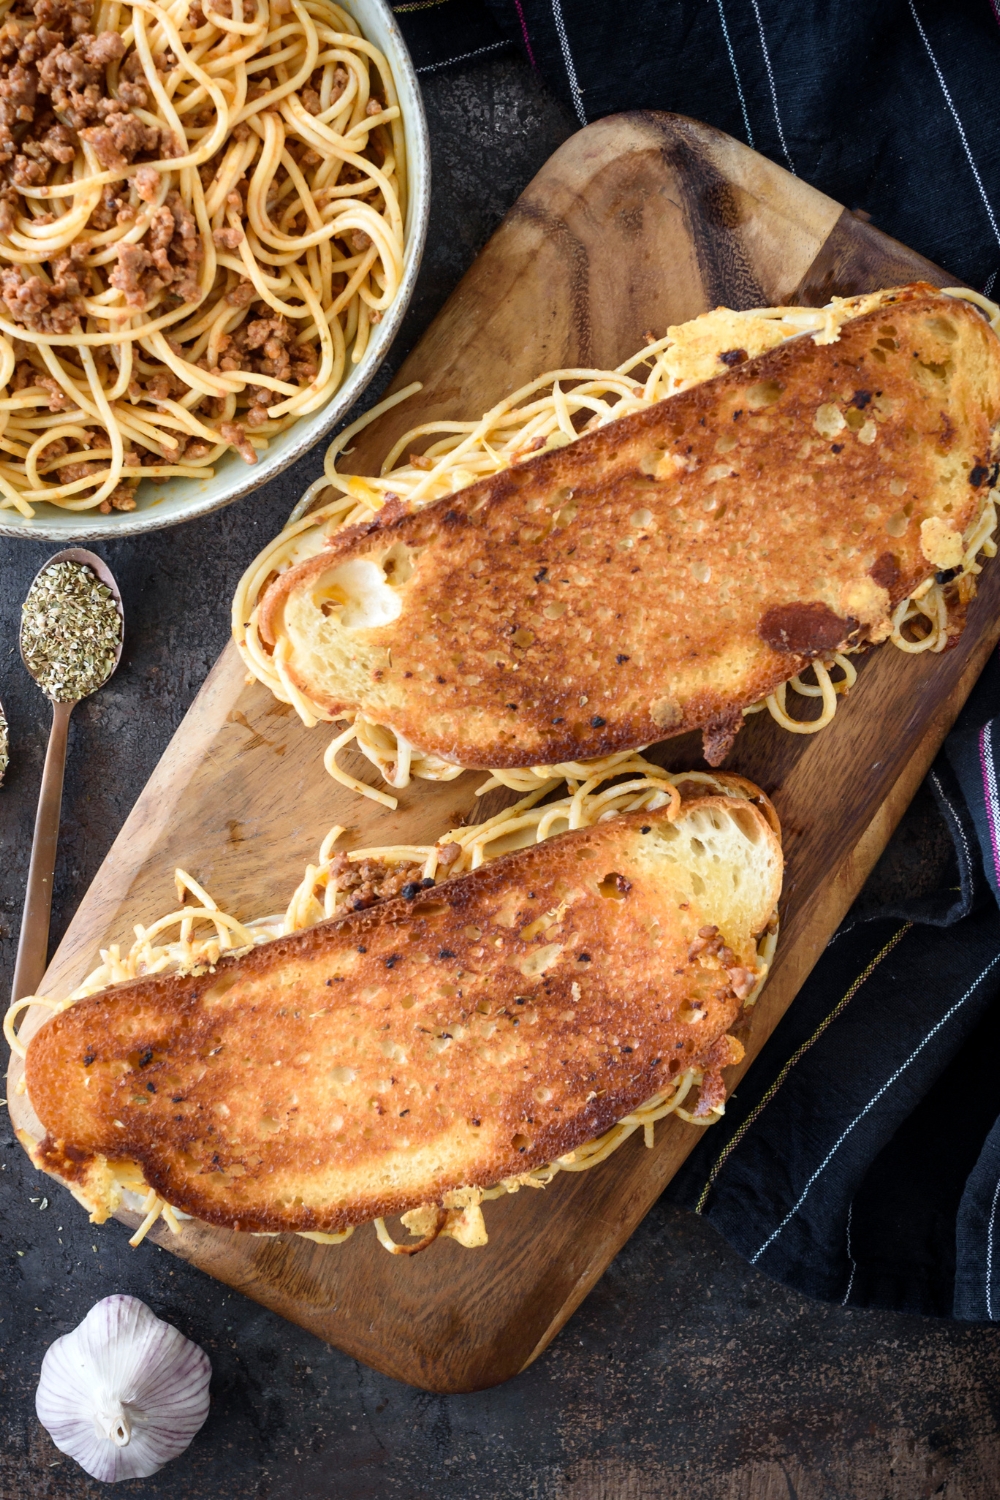 Two spaghetti sandwiches on a cutting board with spaghetti noodles spilling out the sides.